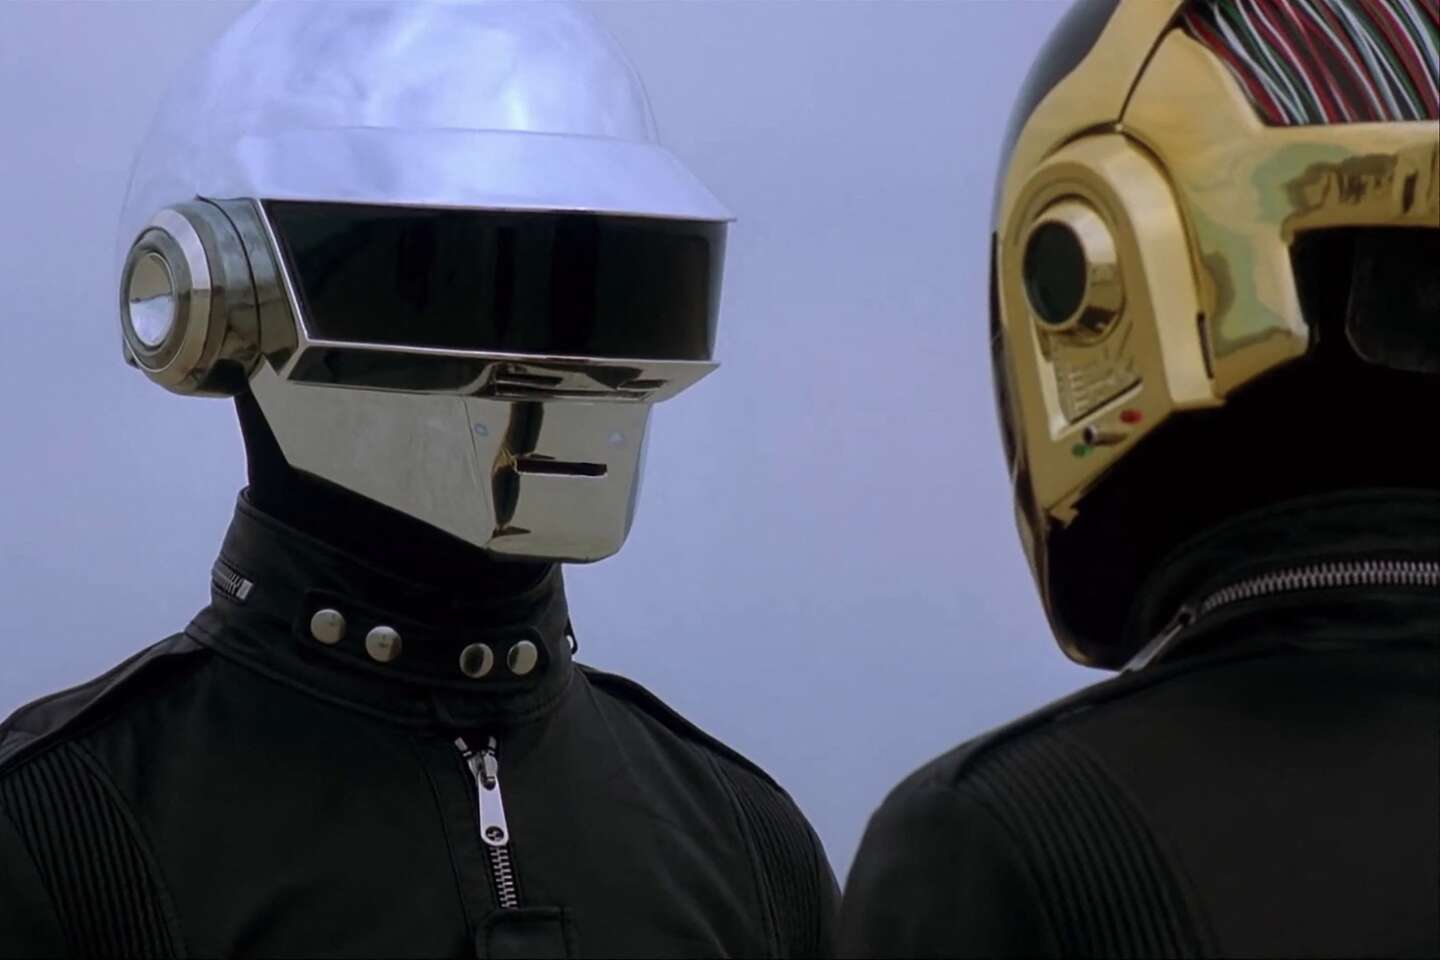 Daft Punk, French electronic music duo, split up after 28 years, Daft Punk